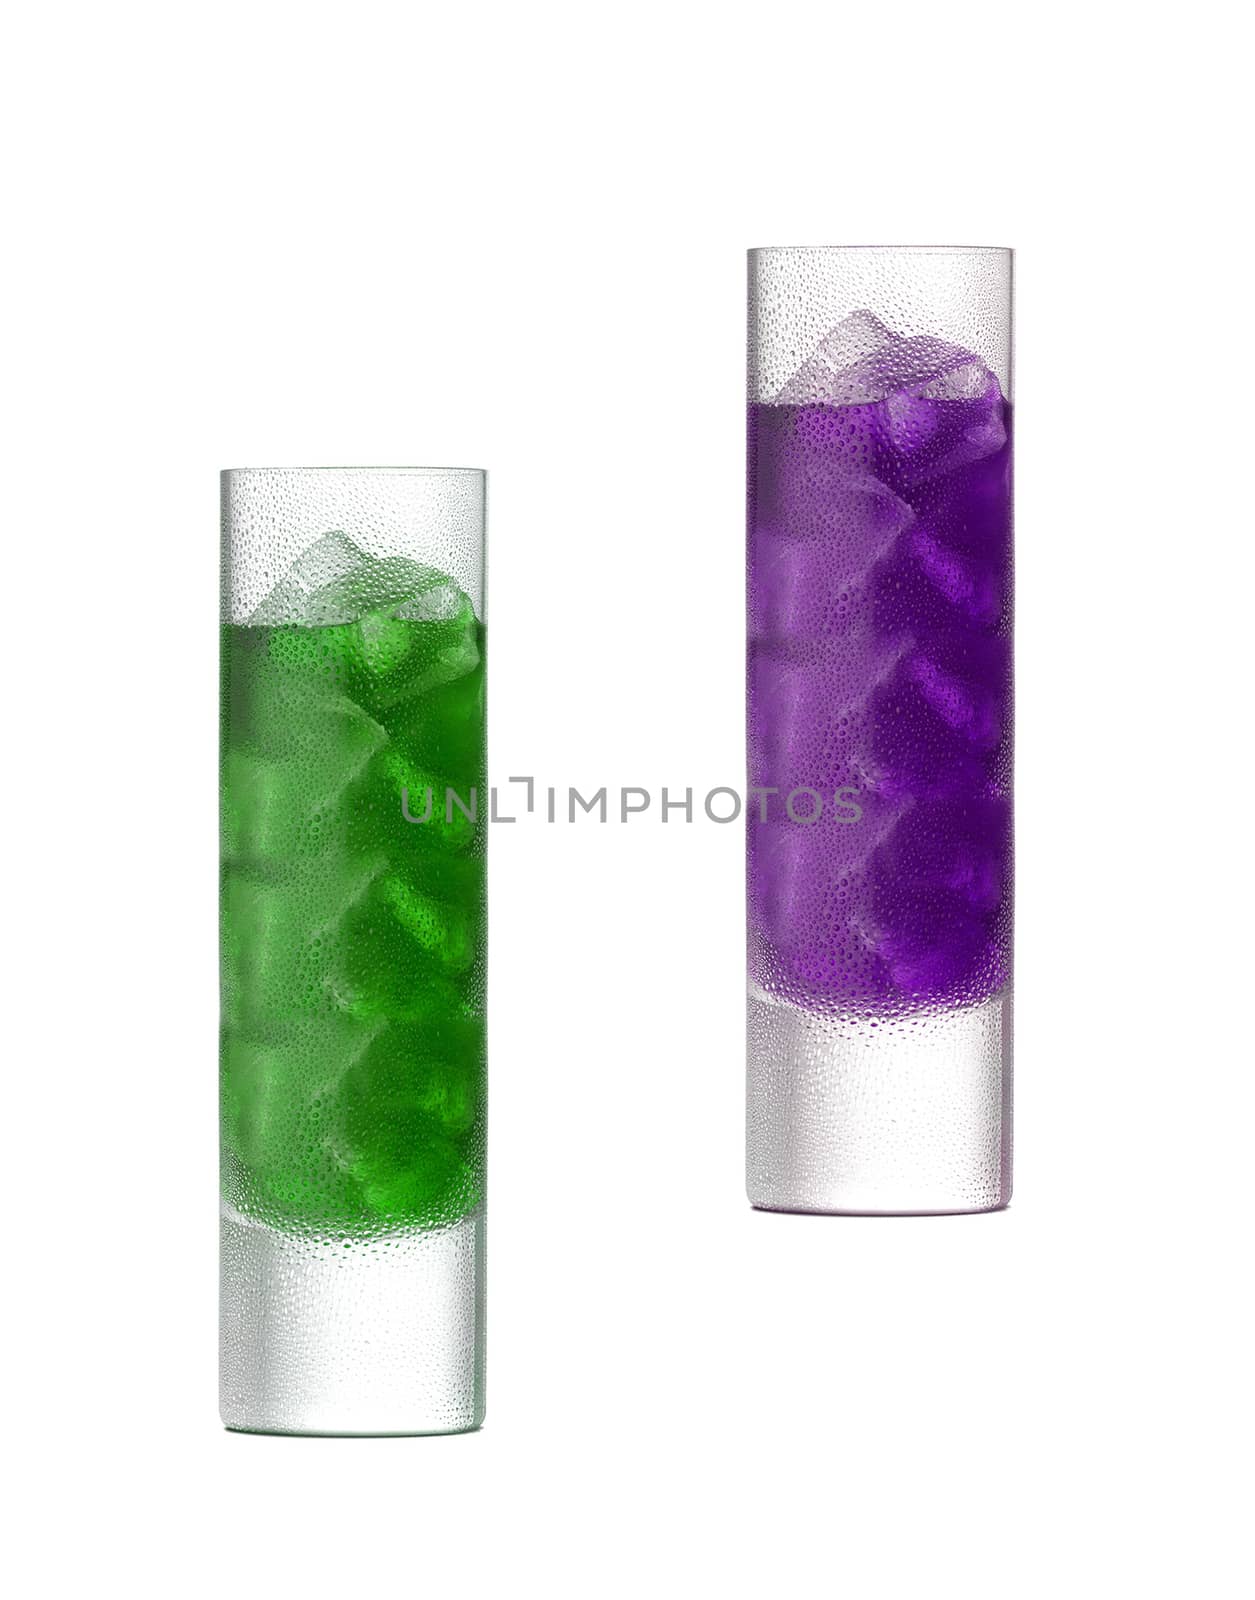 cocktails on white background